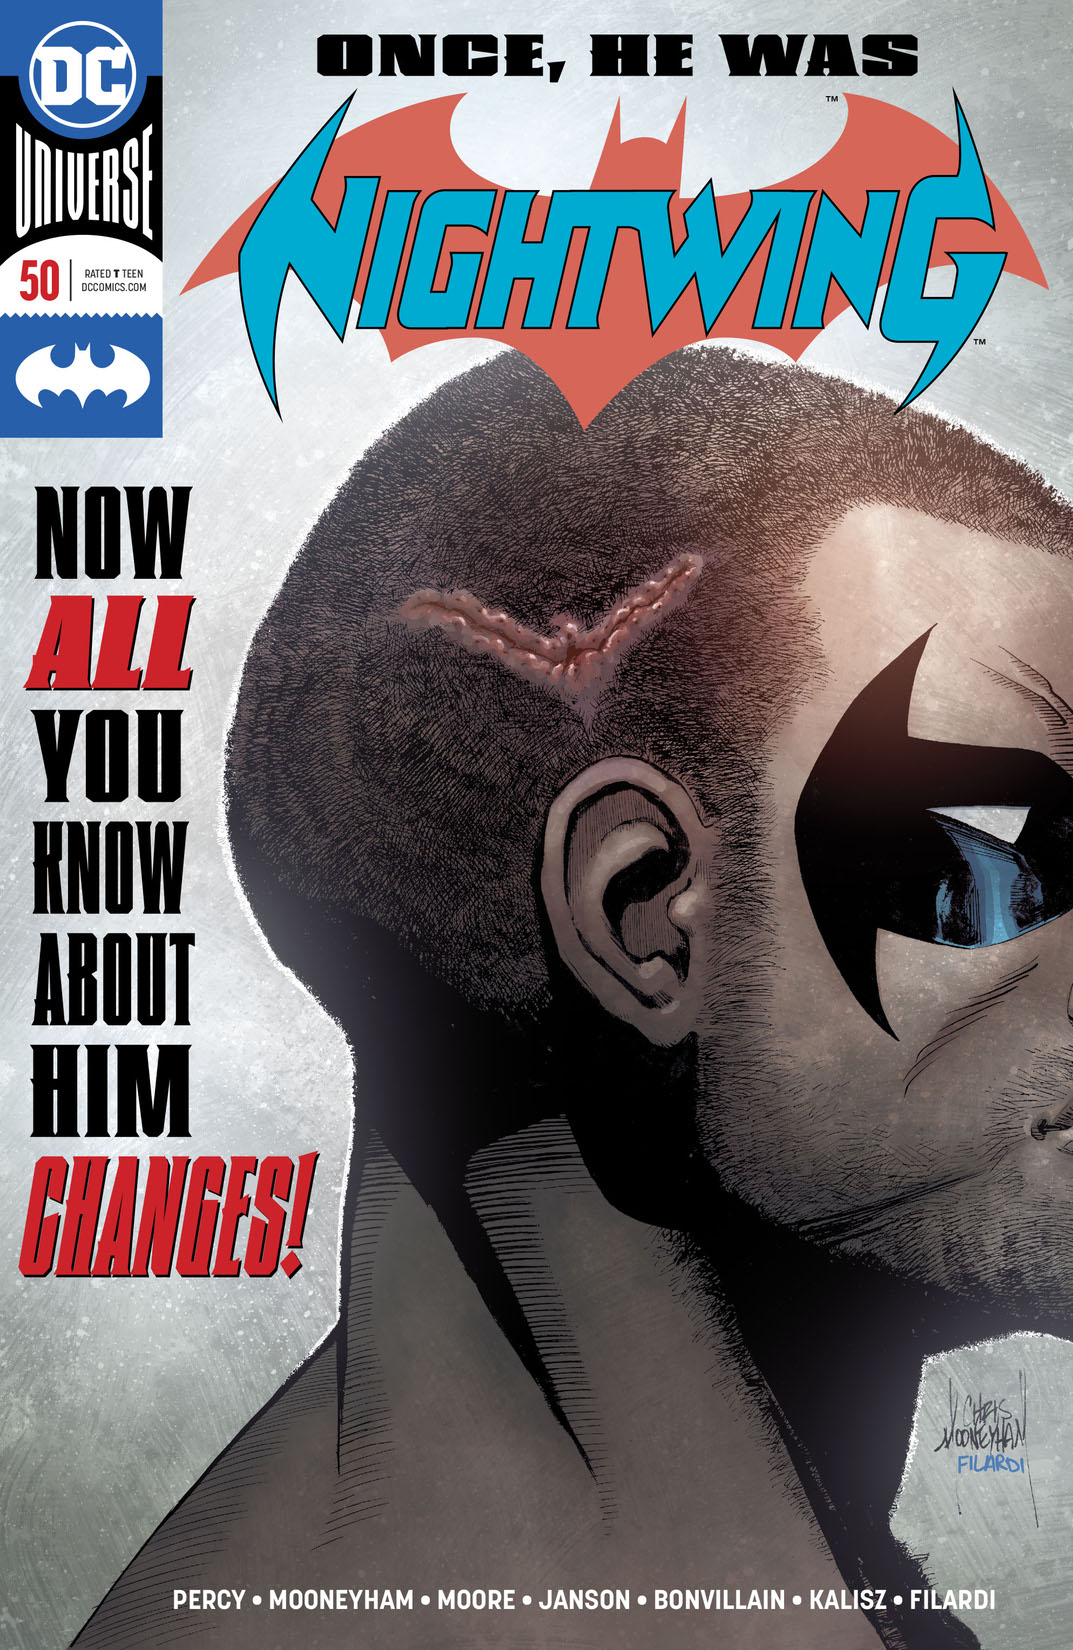 Nightwing (2016-) #50 preview images